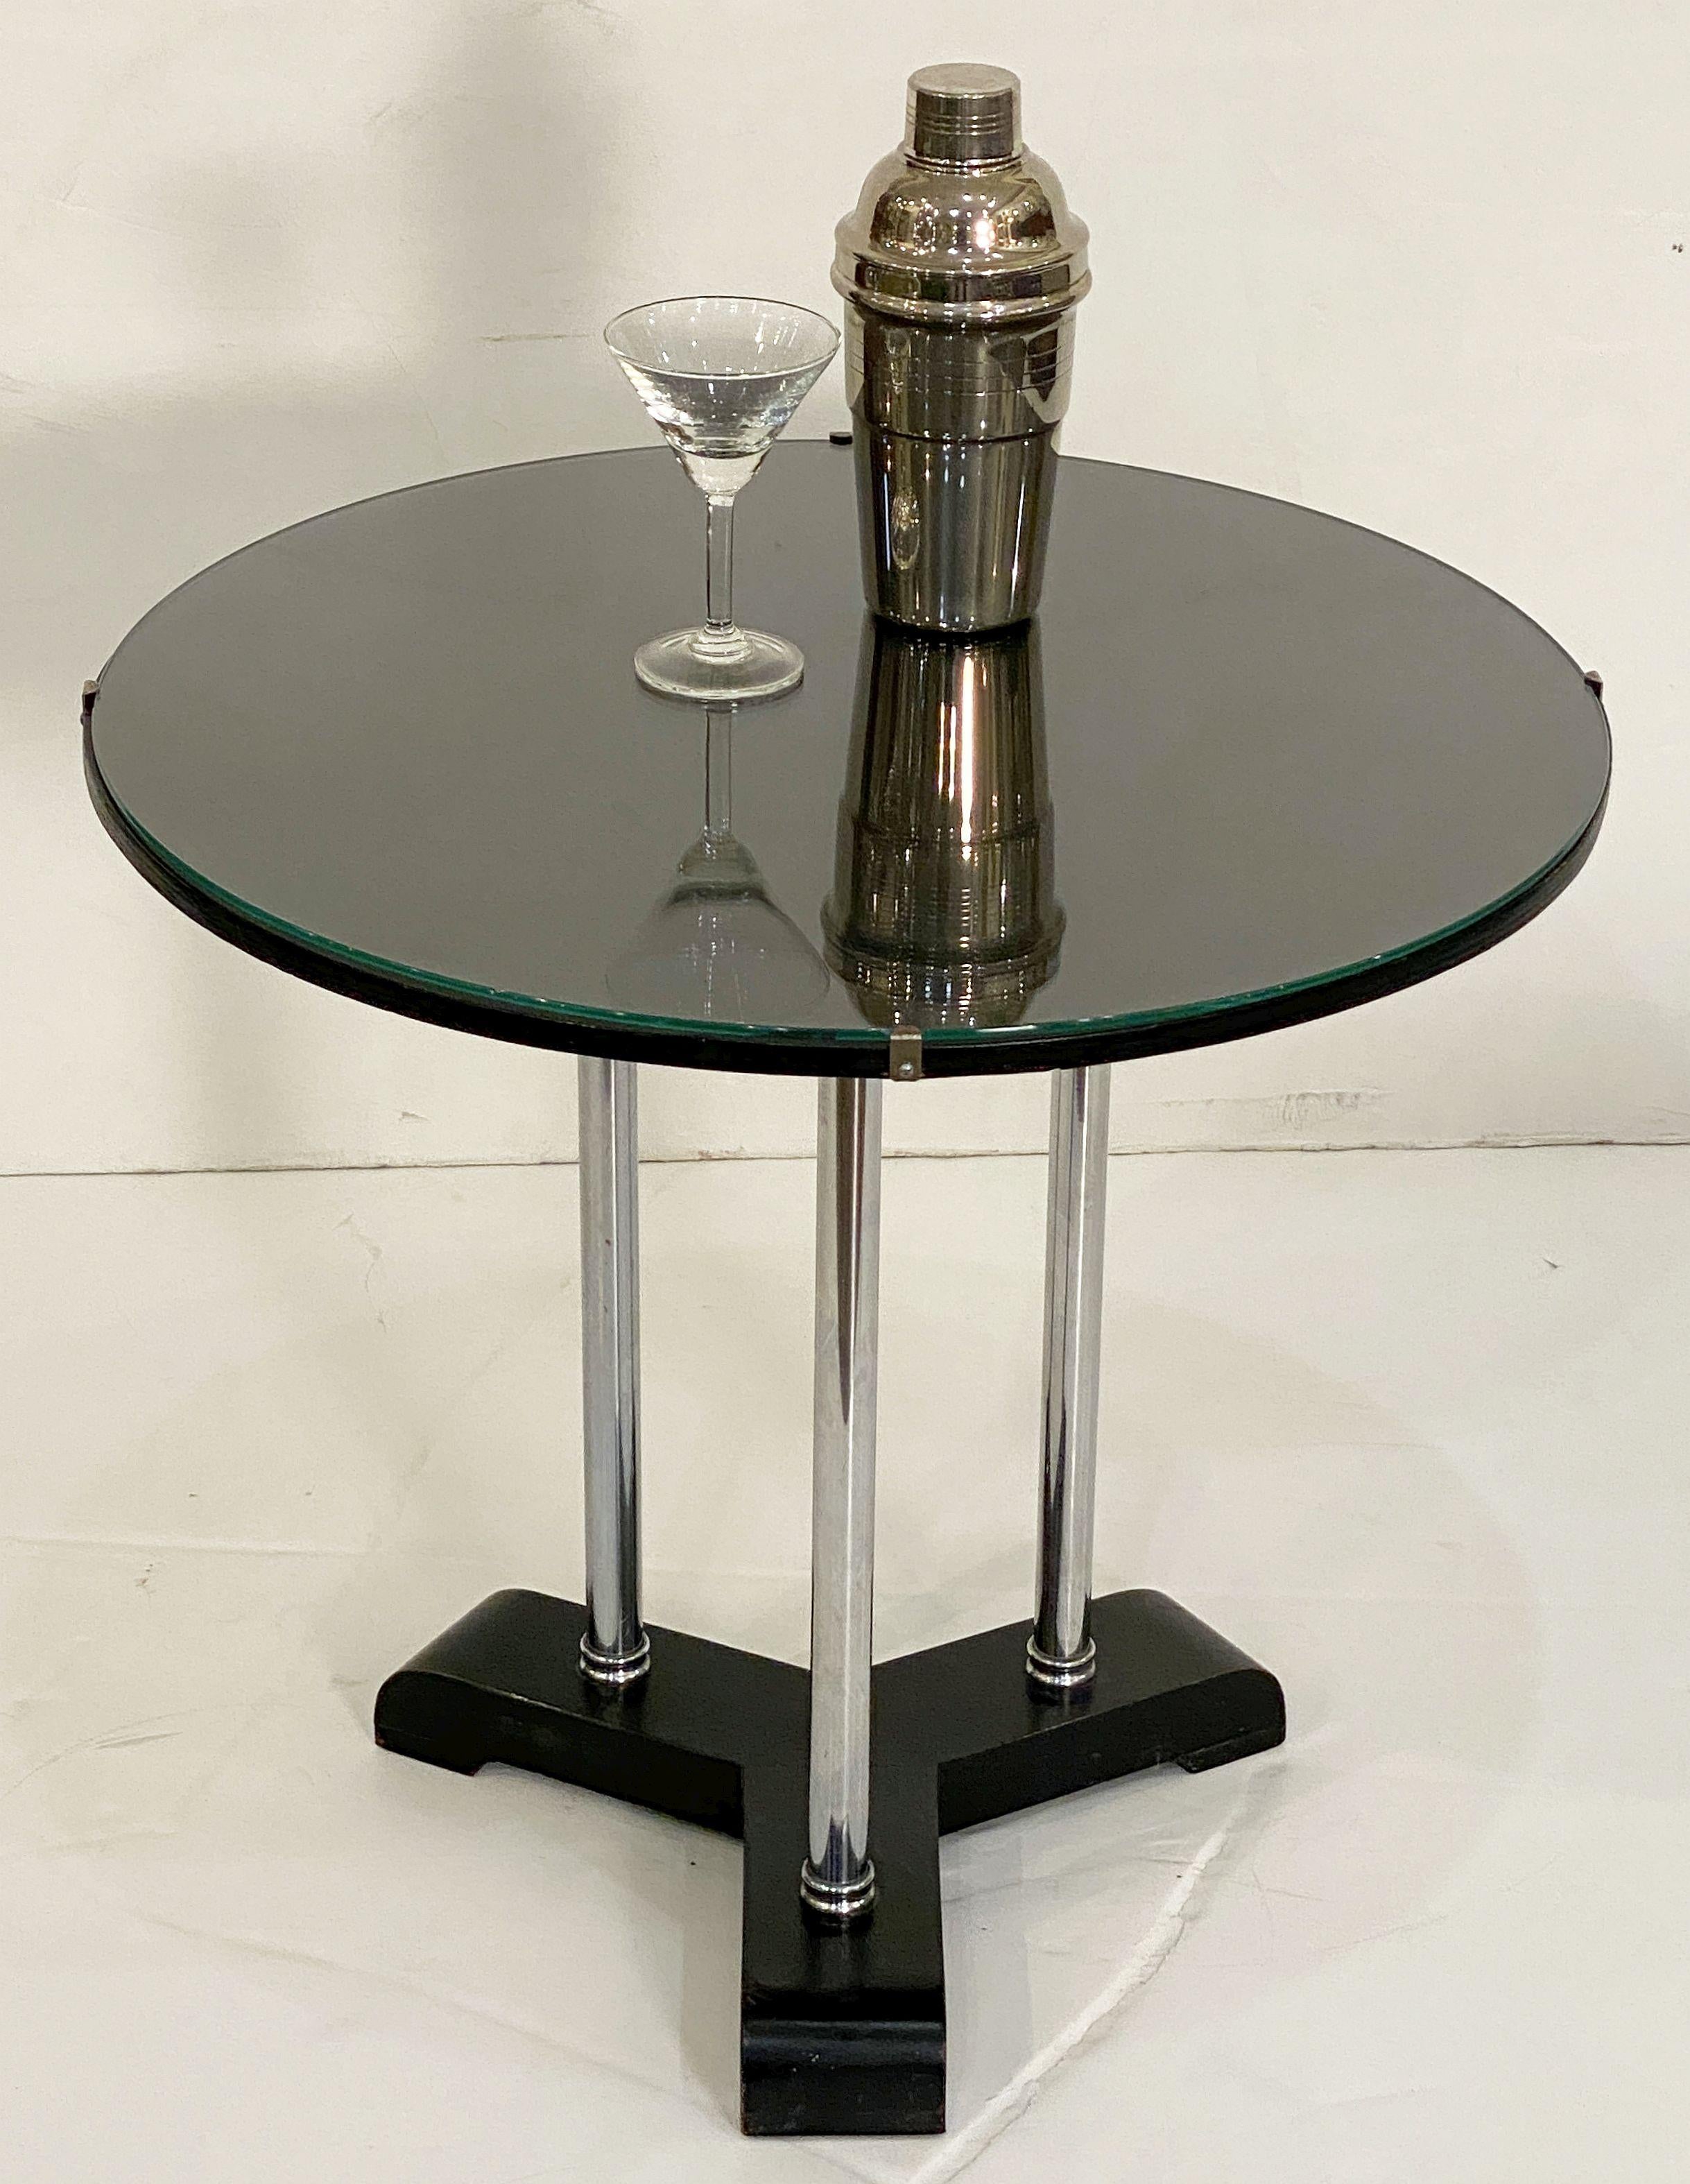 A fine English round or circular side table from the Art Deco era, featuring an upper circle tier of black-painted (ebonized) wood with a glass top, set upon three tubular nickel pedestal column supports, mounted to a bottom tripod base of